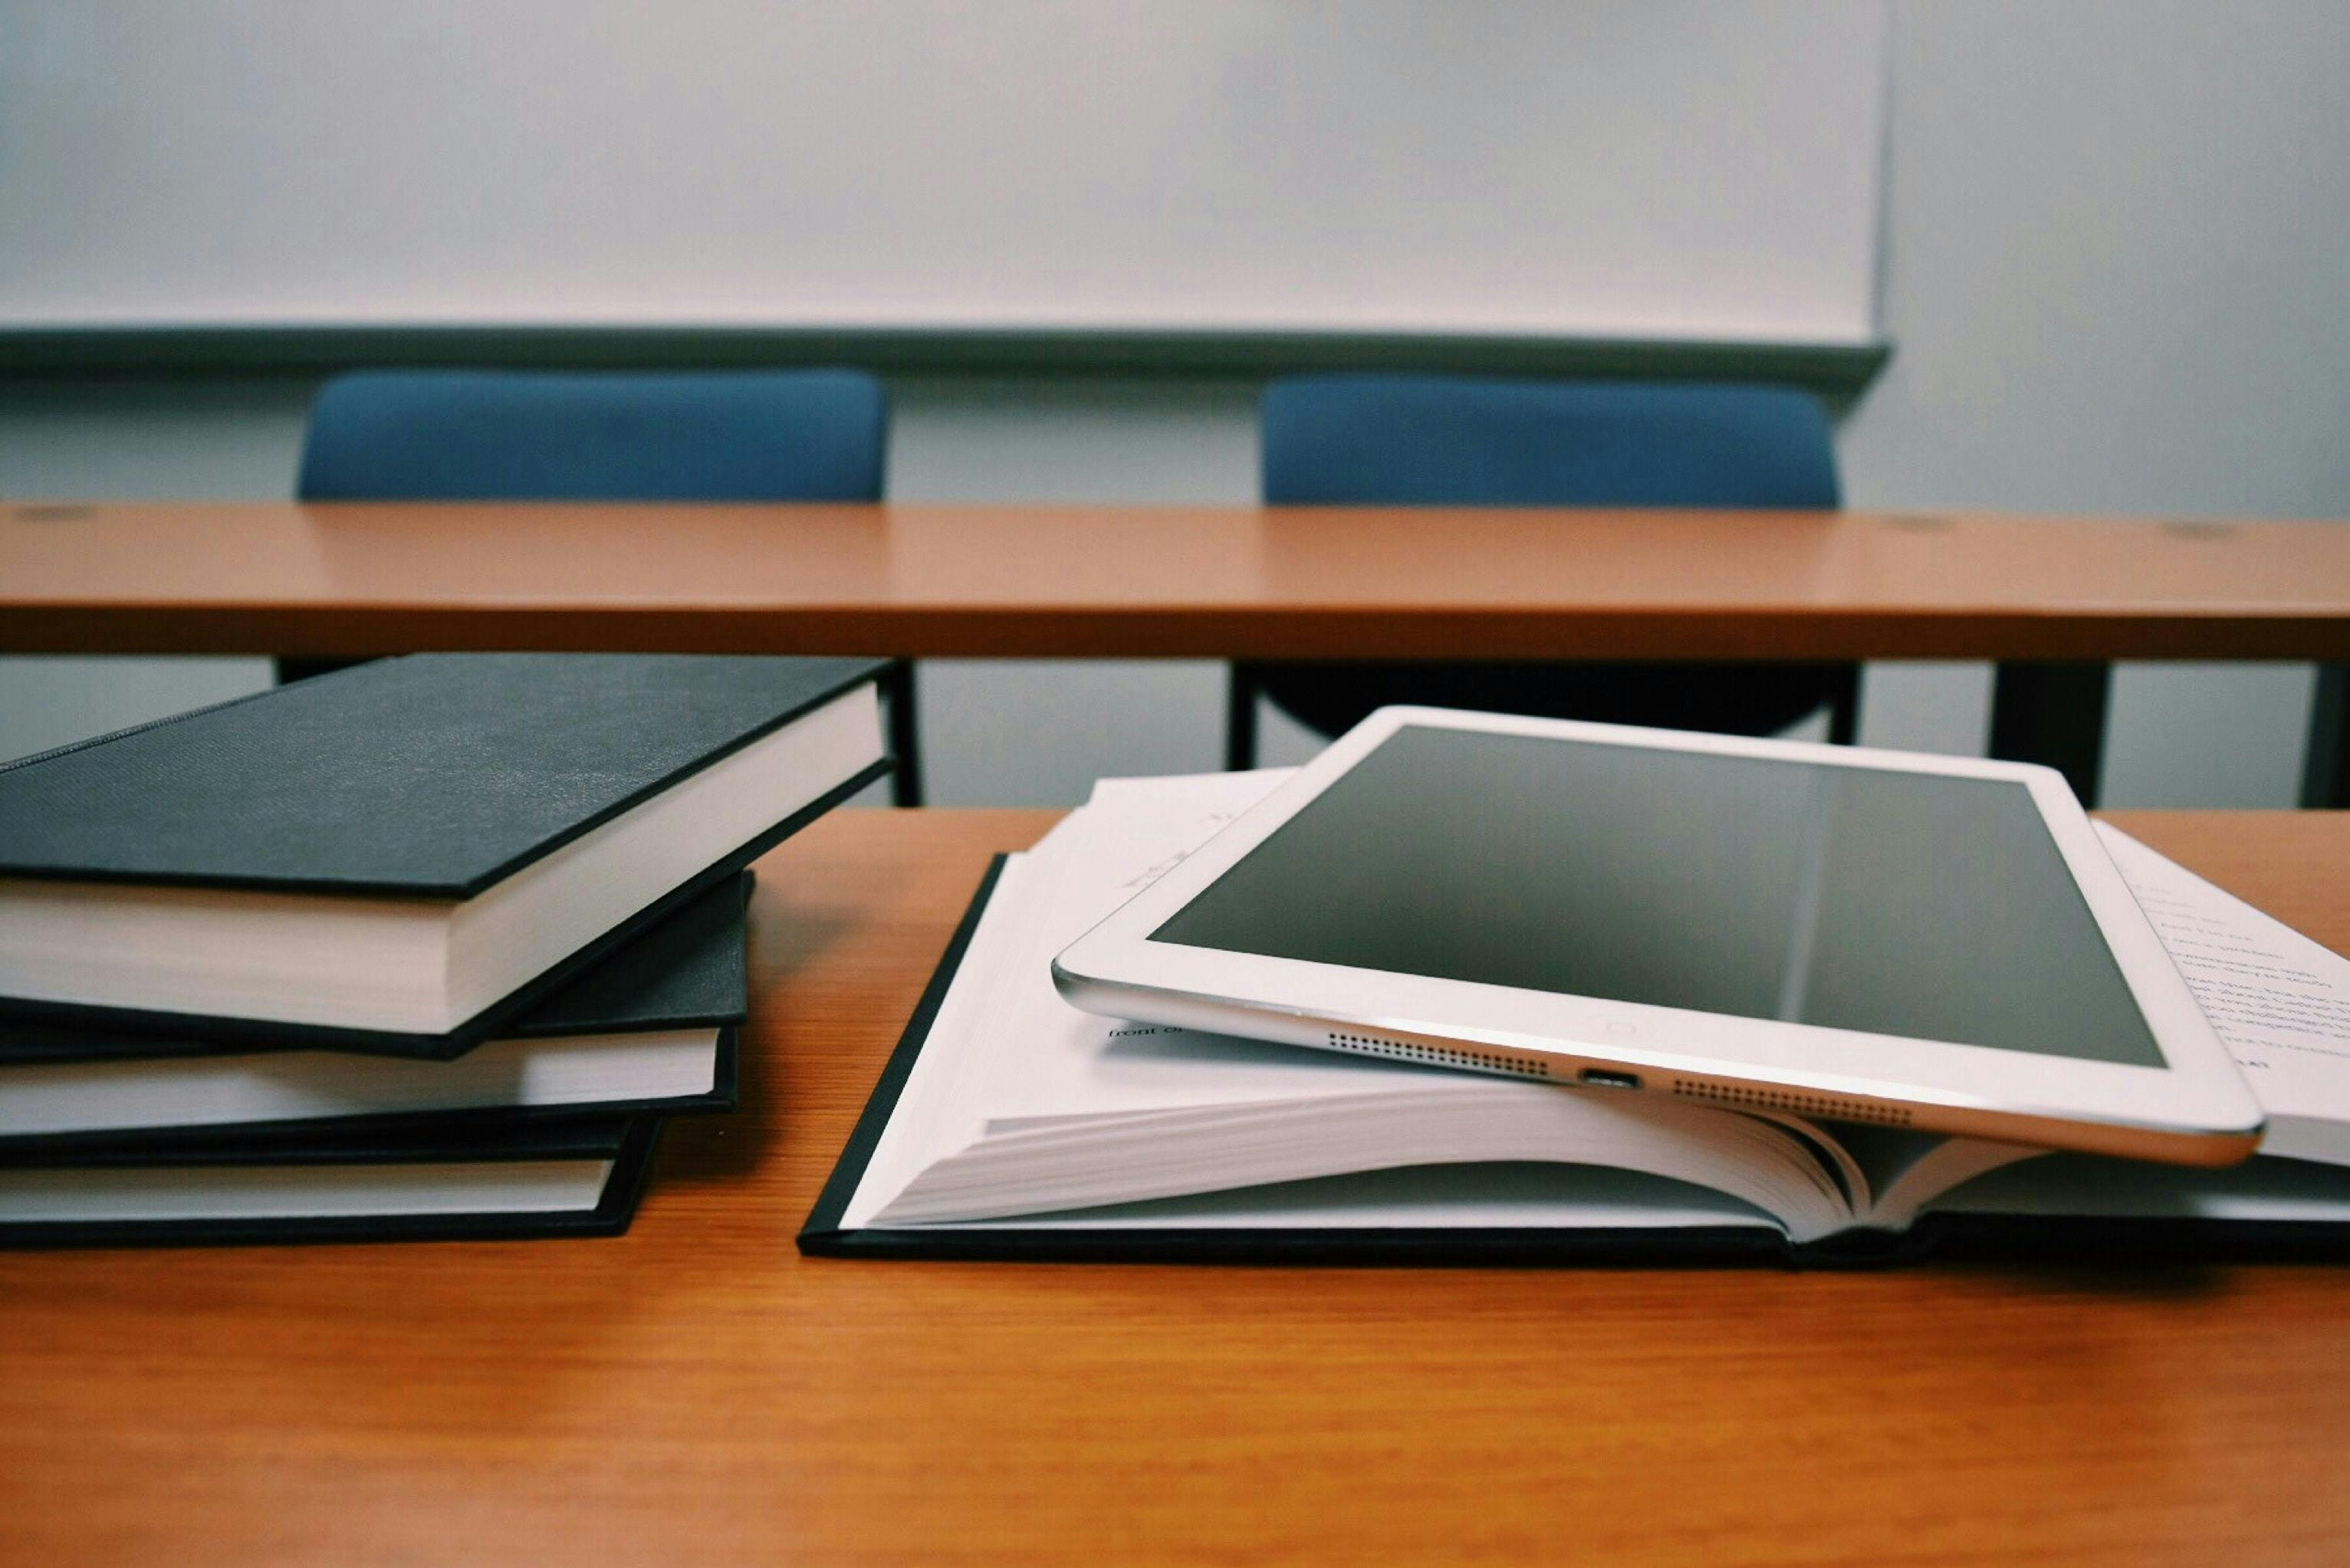 A tablet rests on an open book next to a stack of closed books on a wooden desk in a classroom with blue chairs and a whiteboard in the background.